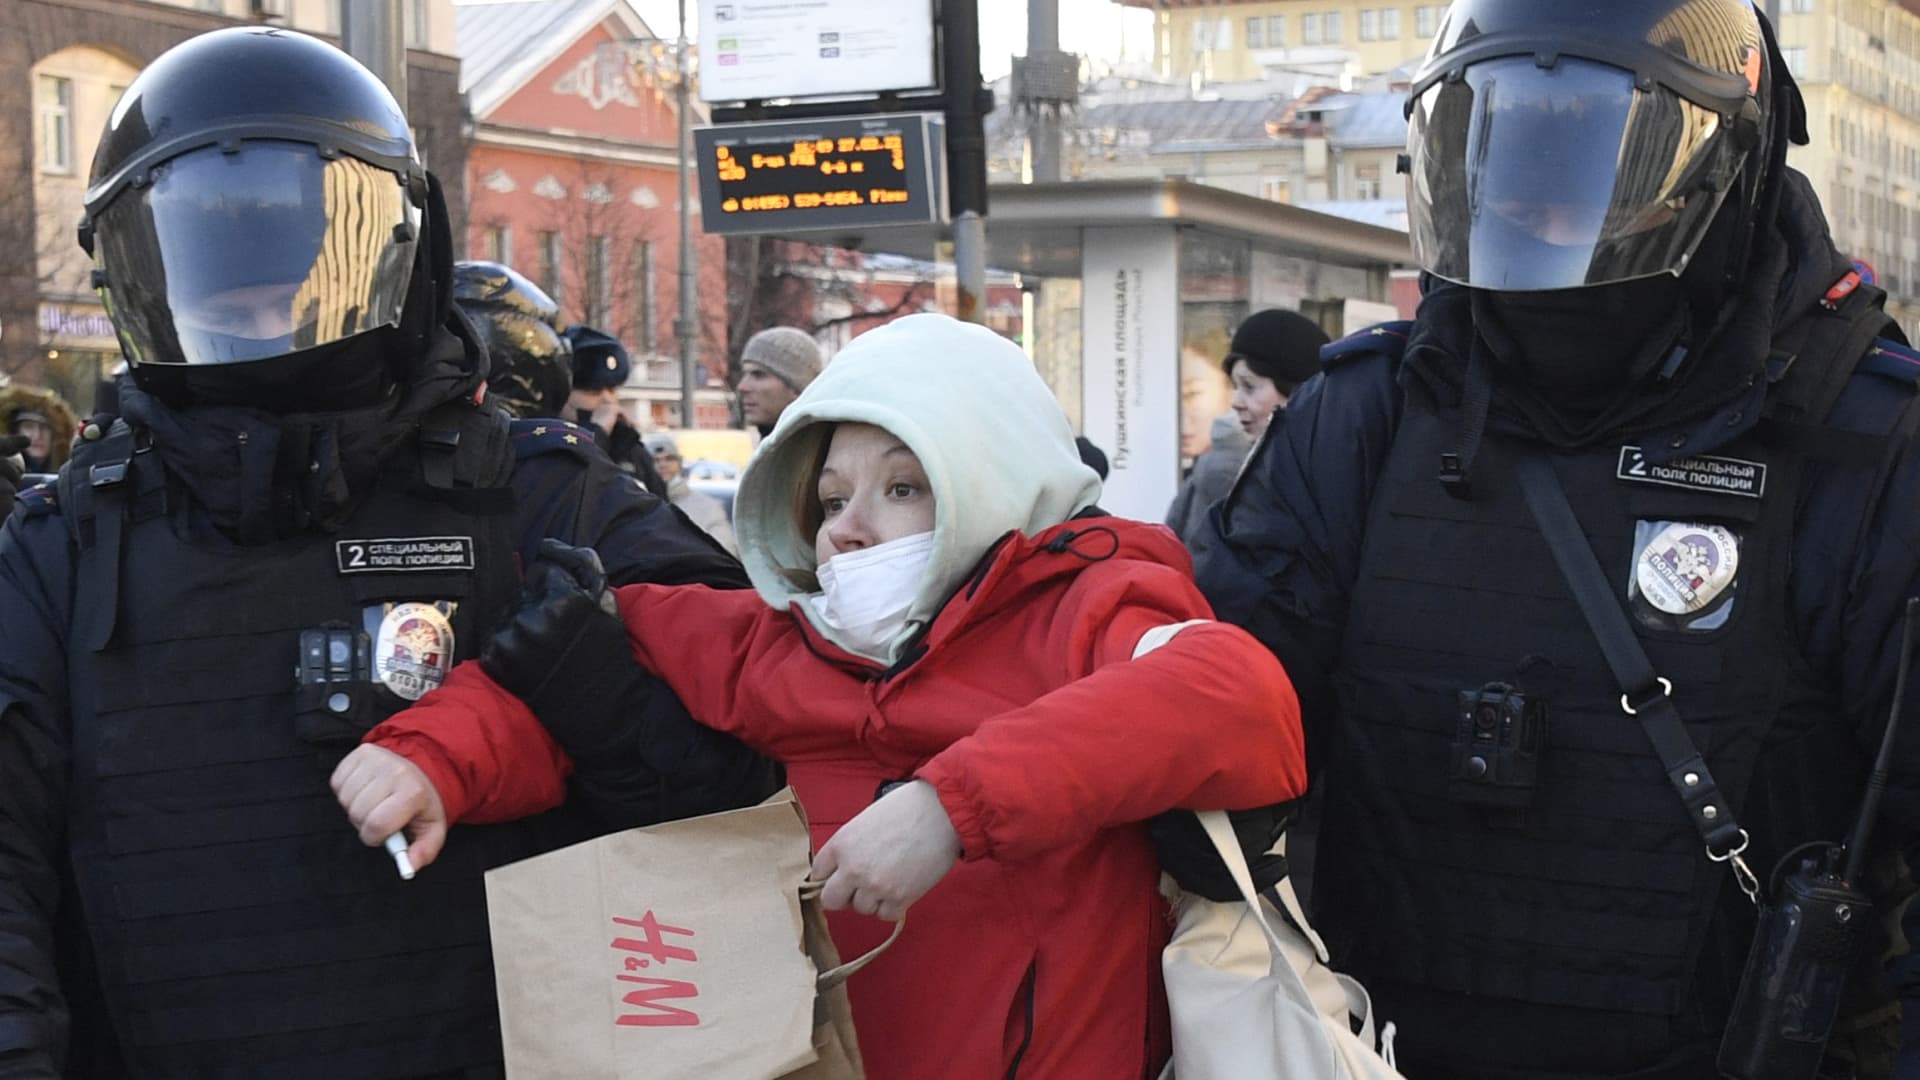 Police officers detain a woman during a protest against Russia's invasion of Ukraine in central Moscow on February 27, 2022.